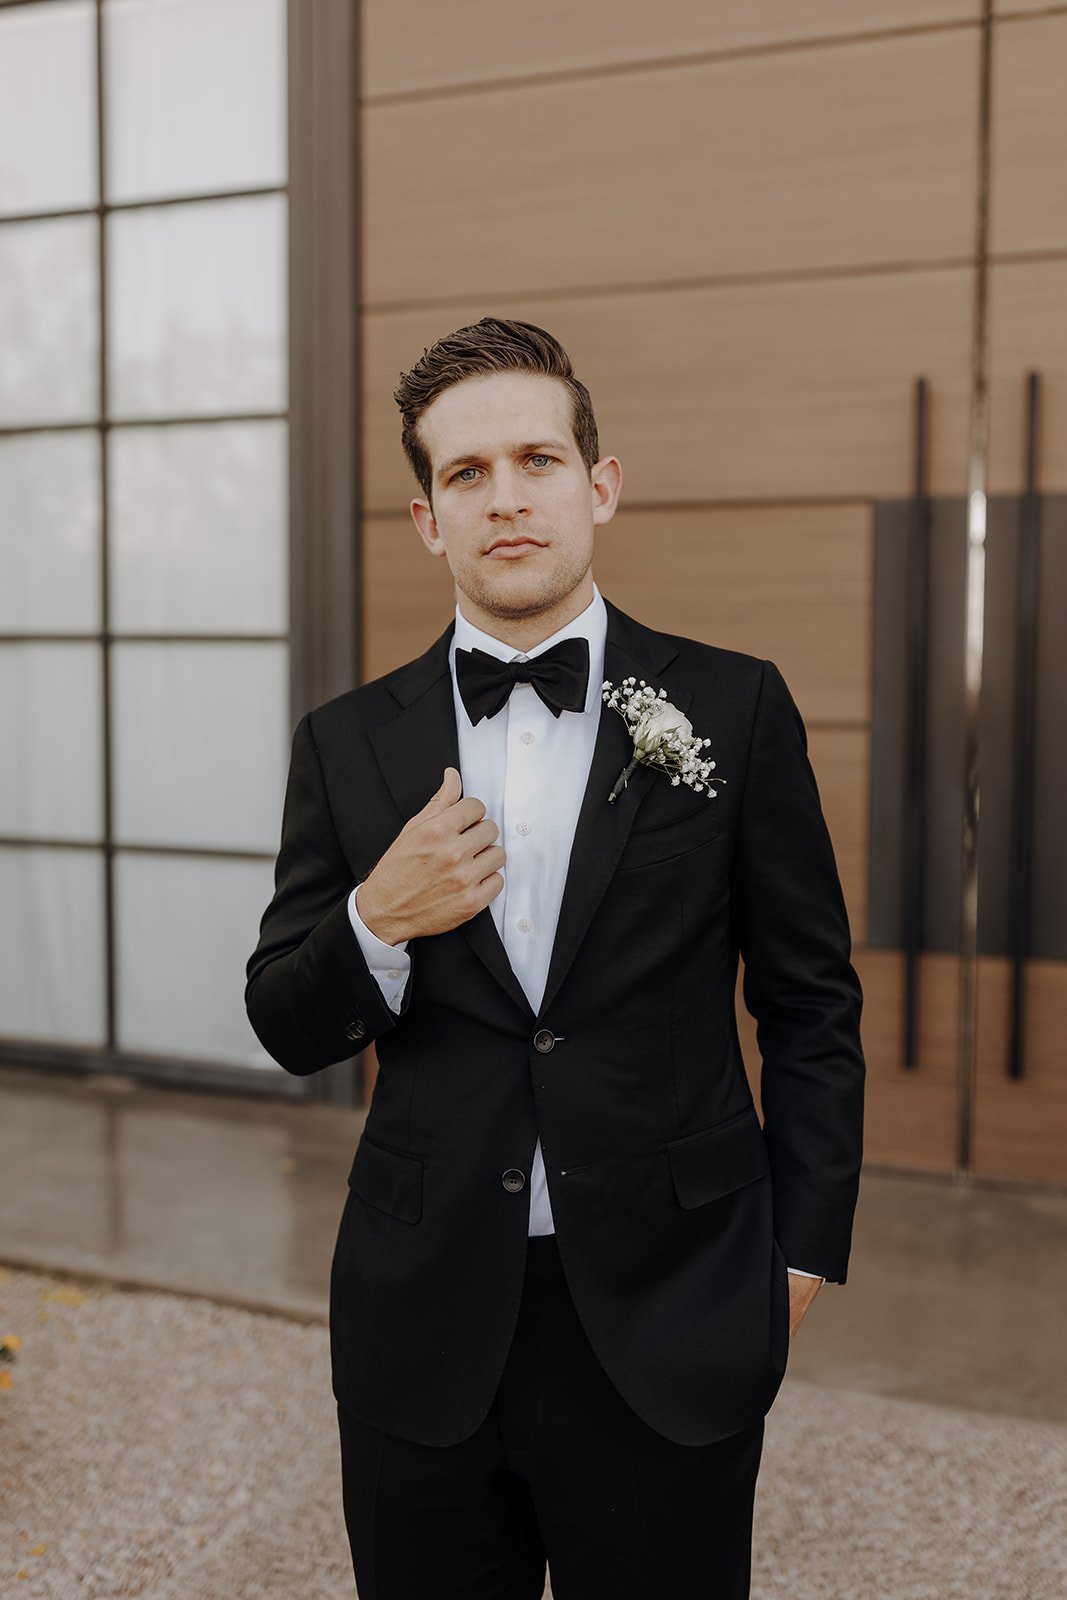 Groom in black suit and white shirt at desert wedding